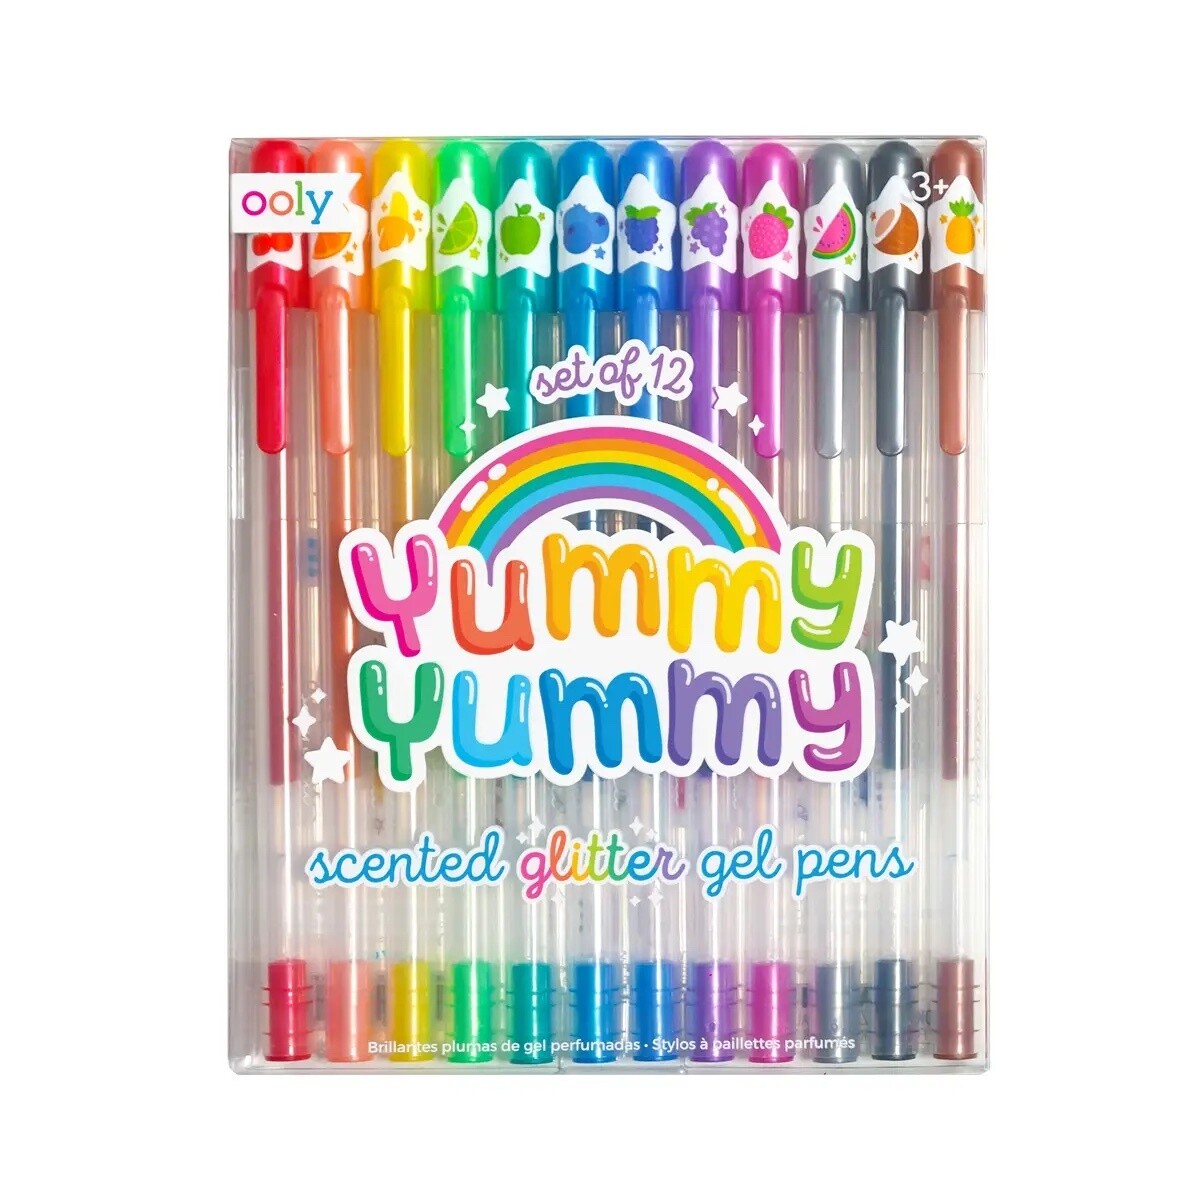 Ooly Yummy Yummy Scented Glitter Gel Pens - 12pc Set